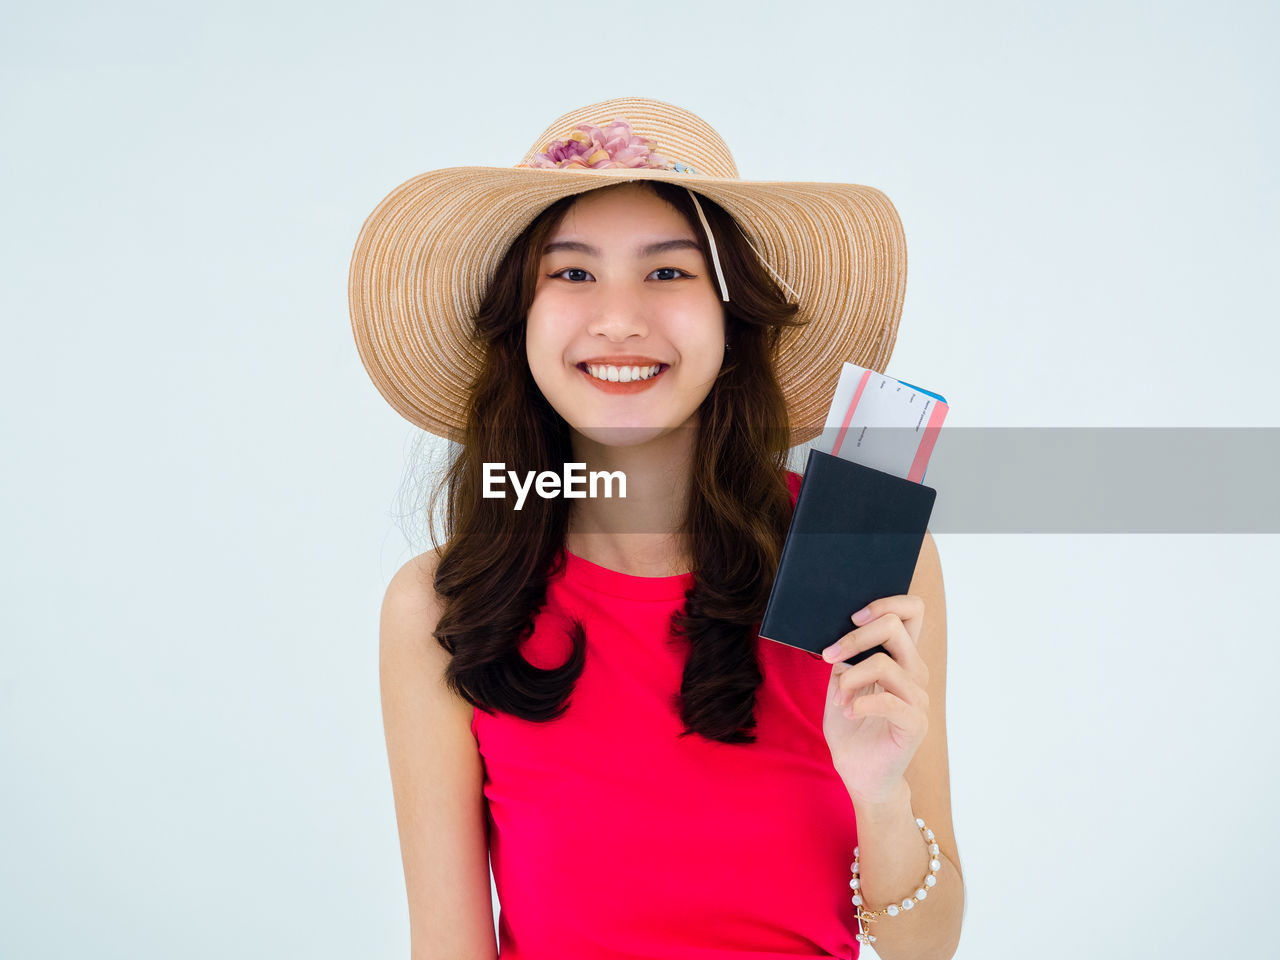 smiling, portrait, happiness, one person, women, hat, clothing, adult, studio shot, emotion, looking at camera, sun hat, pink, cheerful, holding, long hair, young adult, positive emotion, indoors, smile, teeth, waist up, person, casual clothing, front view, female, hairstyle, fashion accessory, standing, child, lifestyles, fun, copy space, enjoyment, brown hair, communication, technology, straw hat, white background, fashion